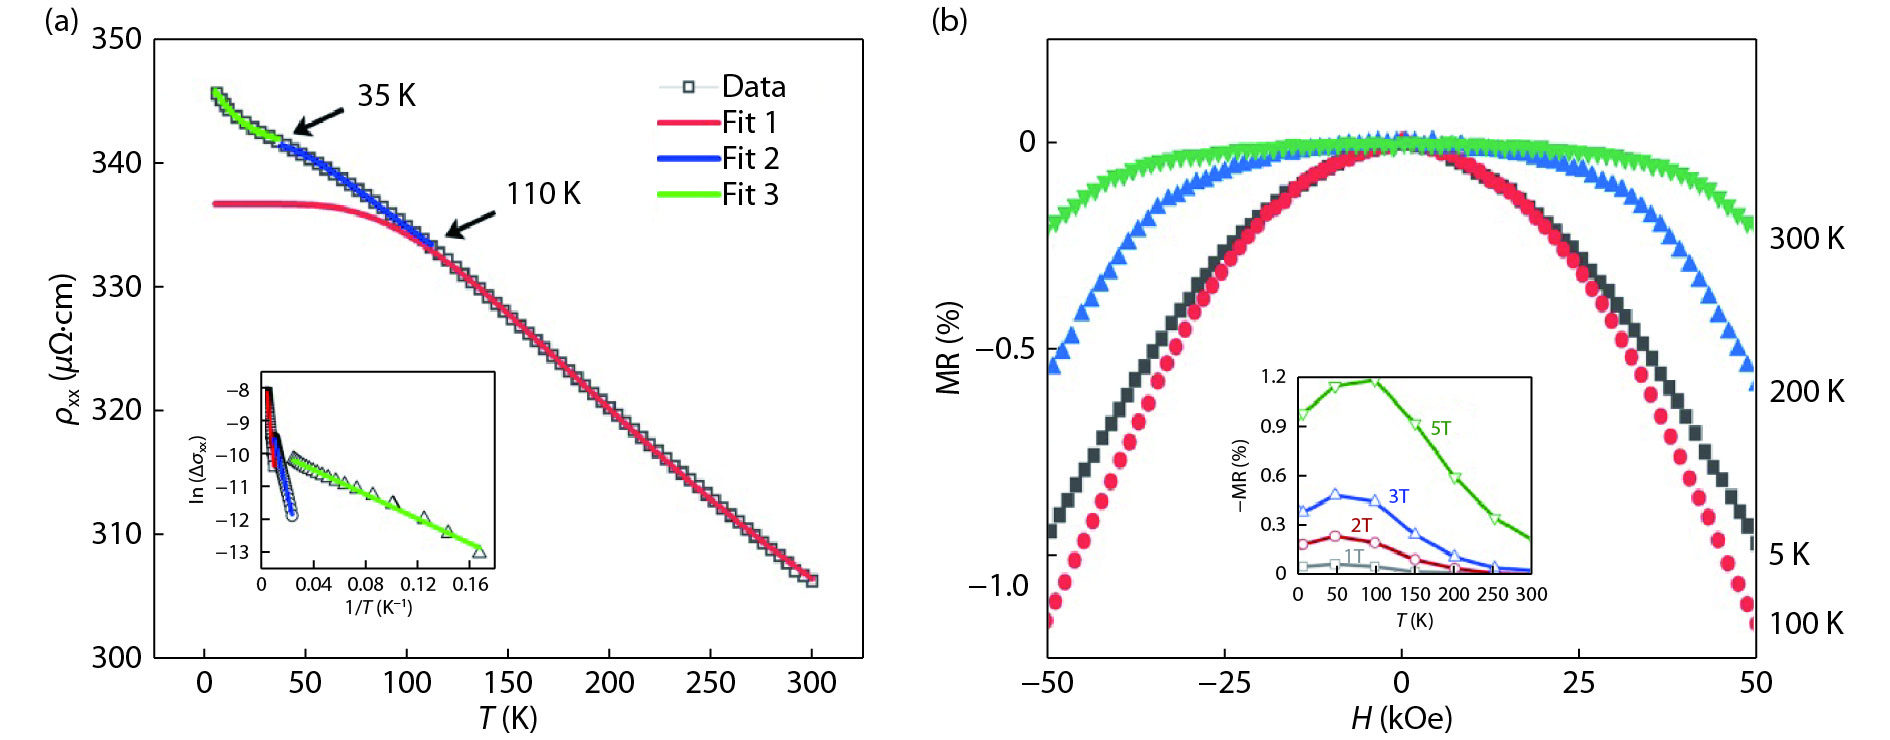 (Color online) (a) T dependence of the zero-field ρxx varying from 5 to 300 K. The fitting curves using activation model in different T regions are plotted in red, blue and green lines, respectively. The inset gives a linear relation between ln(Δσxx) and 1/T in the corresponding T ranges. (b) The MR at several selected temperatures. The inset shows the temperature dependence of MR at specific applied field.